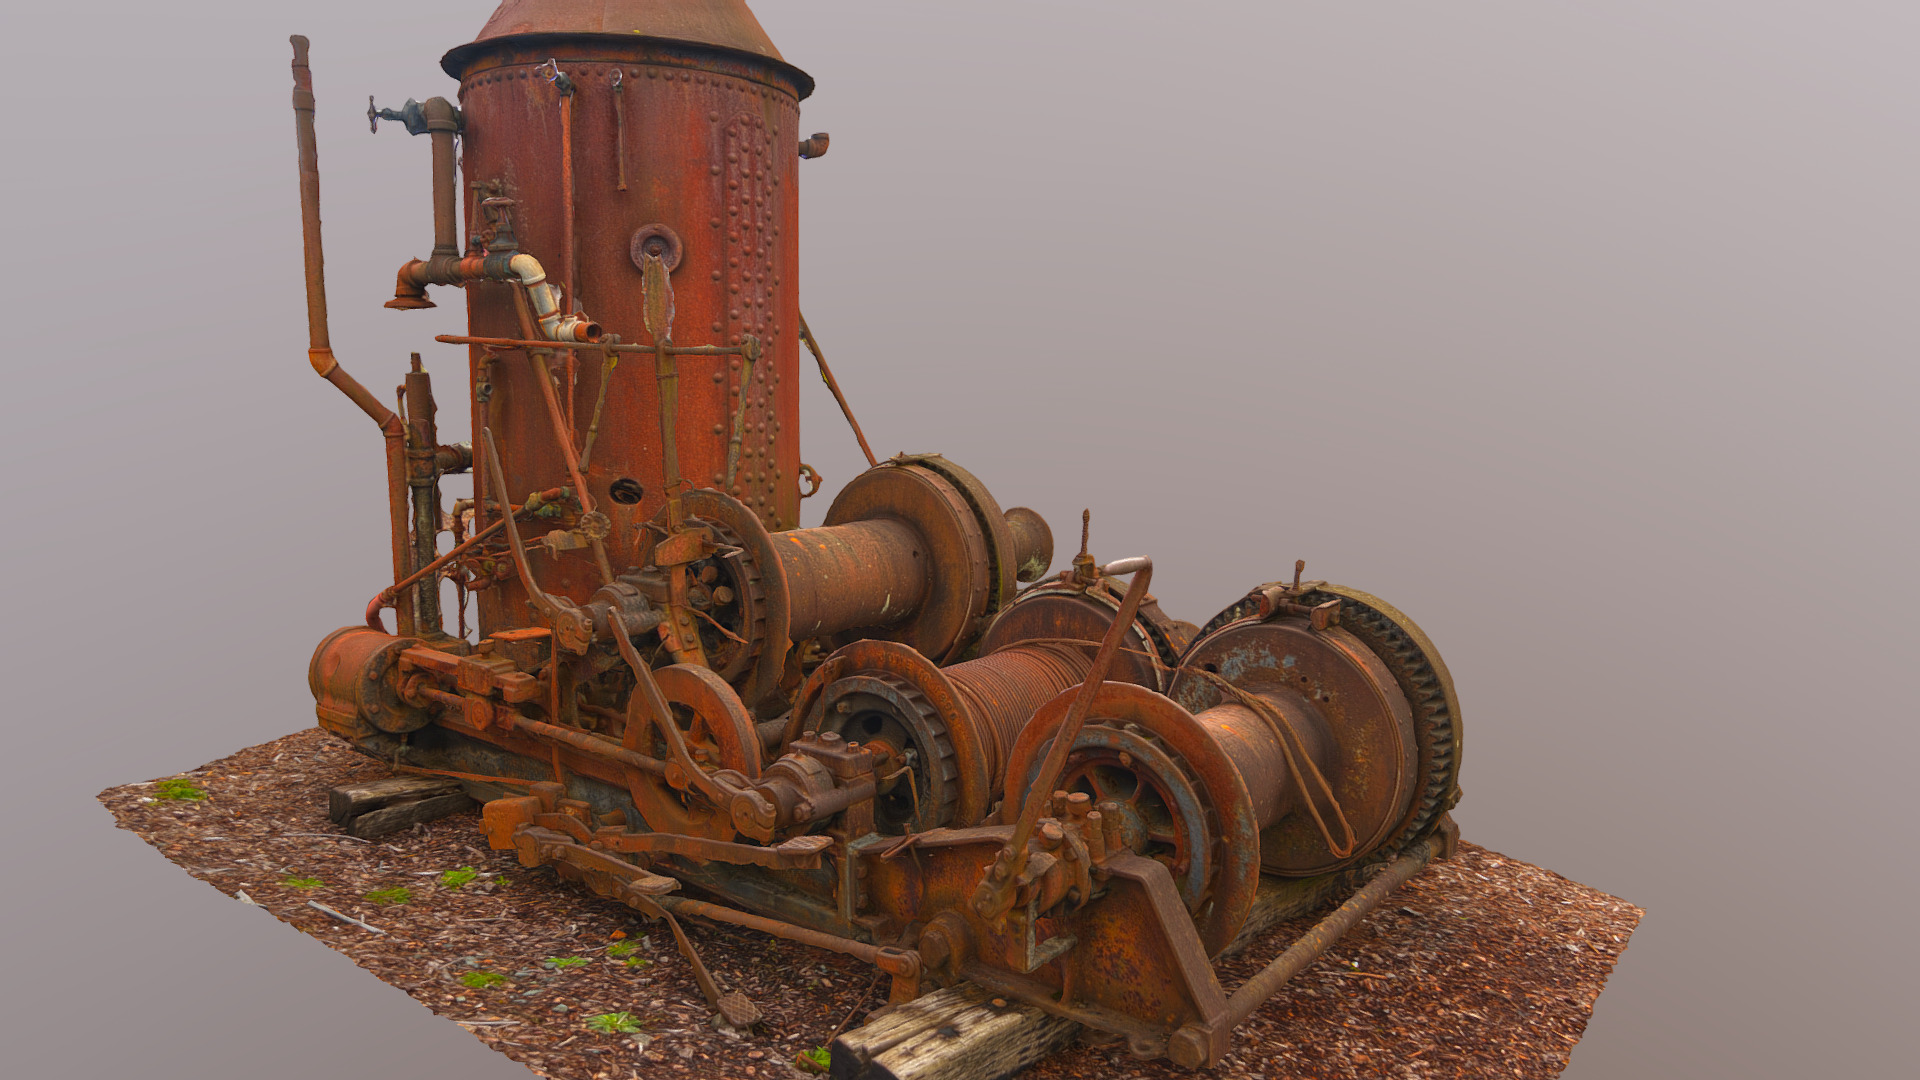 3D model Steam Donkey - This is a 3D model of the Steam Donkey. The 3D model is about a rusted out machine on a wooden platform.